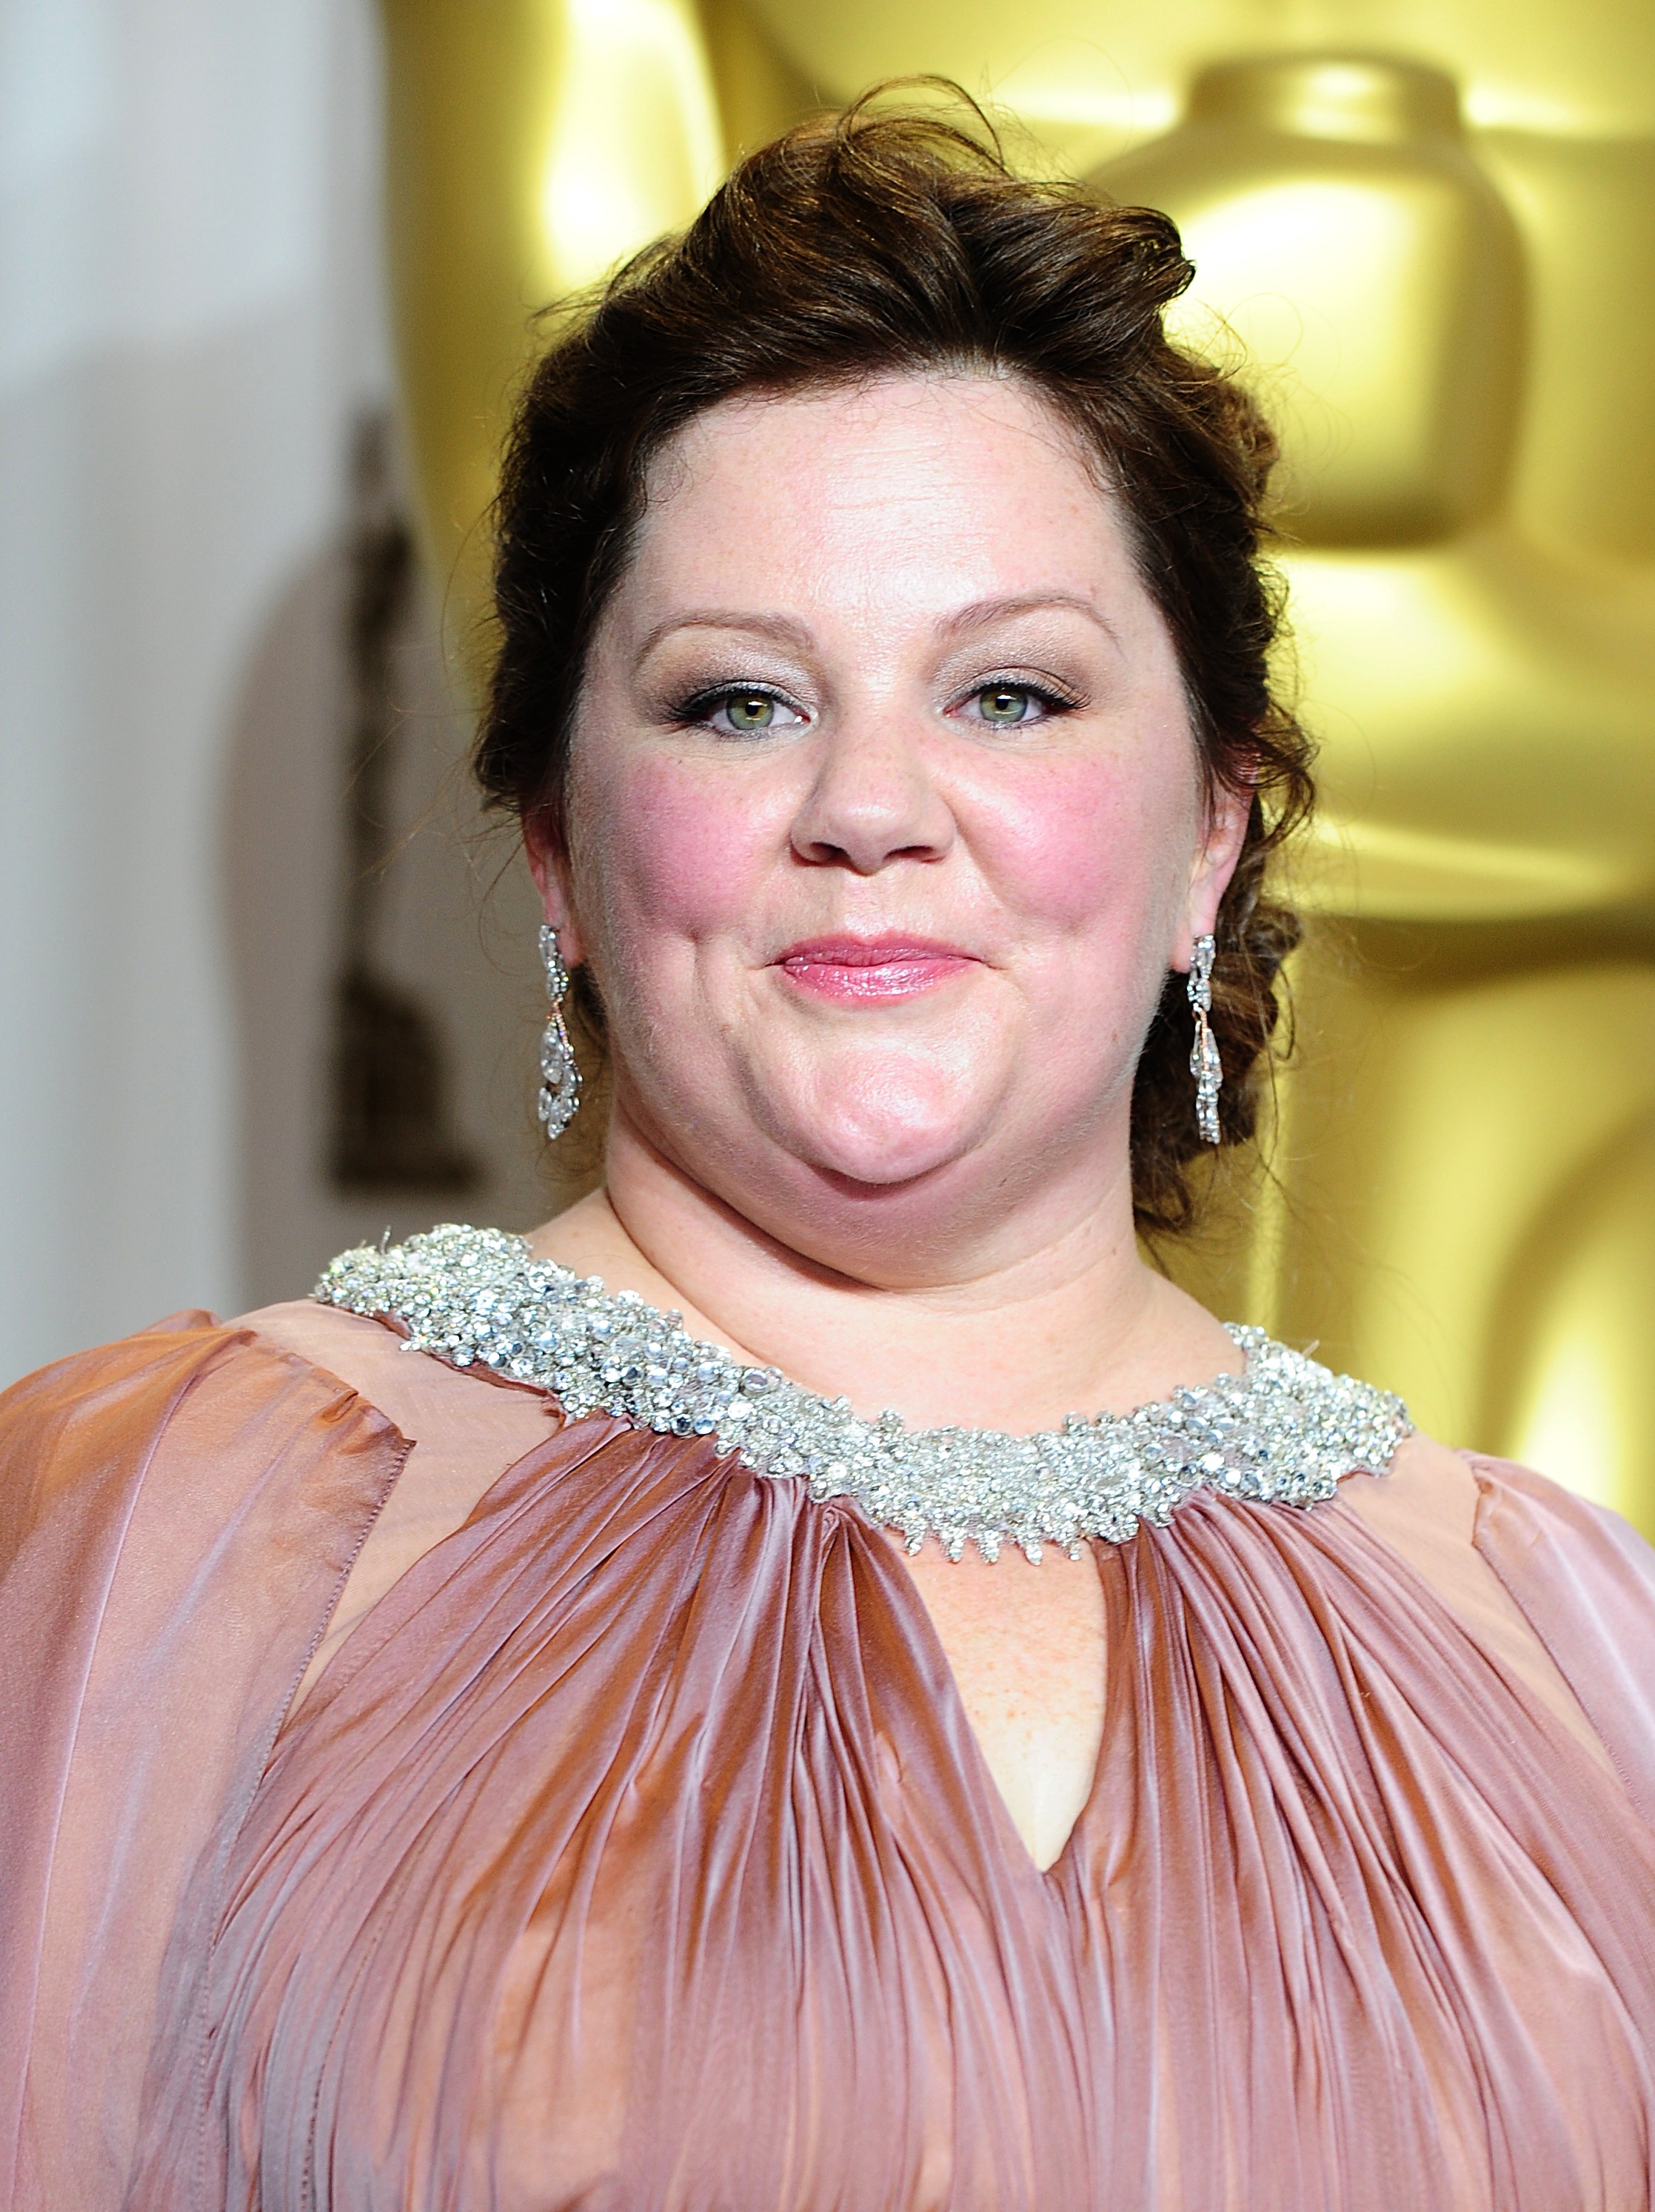 Melissa McCarthy at the 84th Academy Awards at the Kodak Theatre, Los Angeles | Source: Getty Images